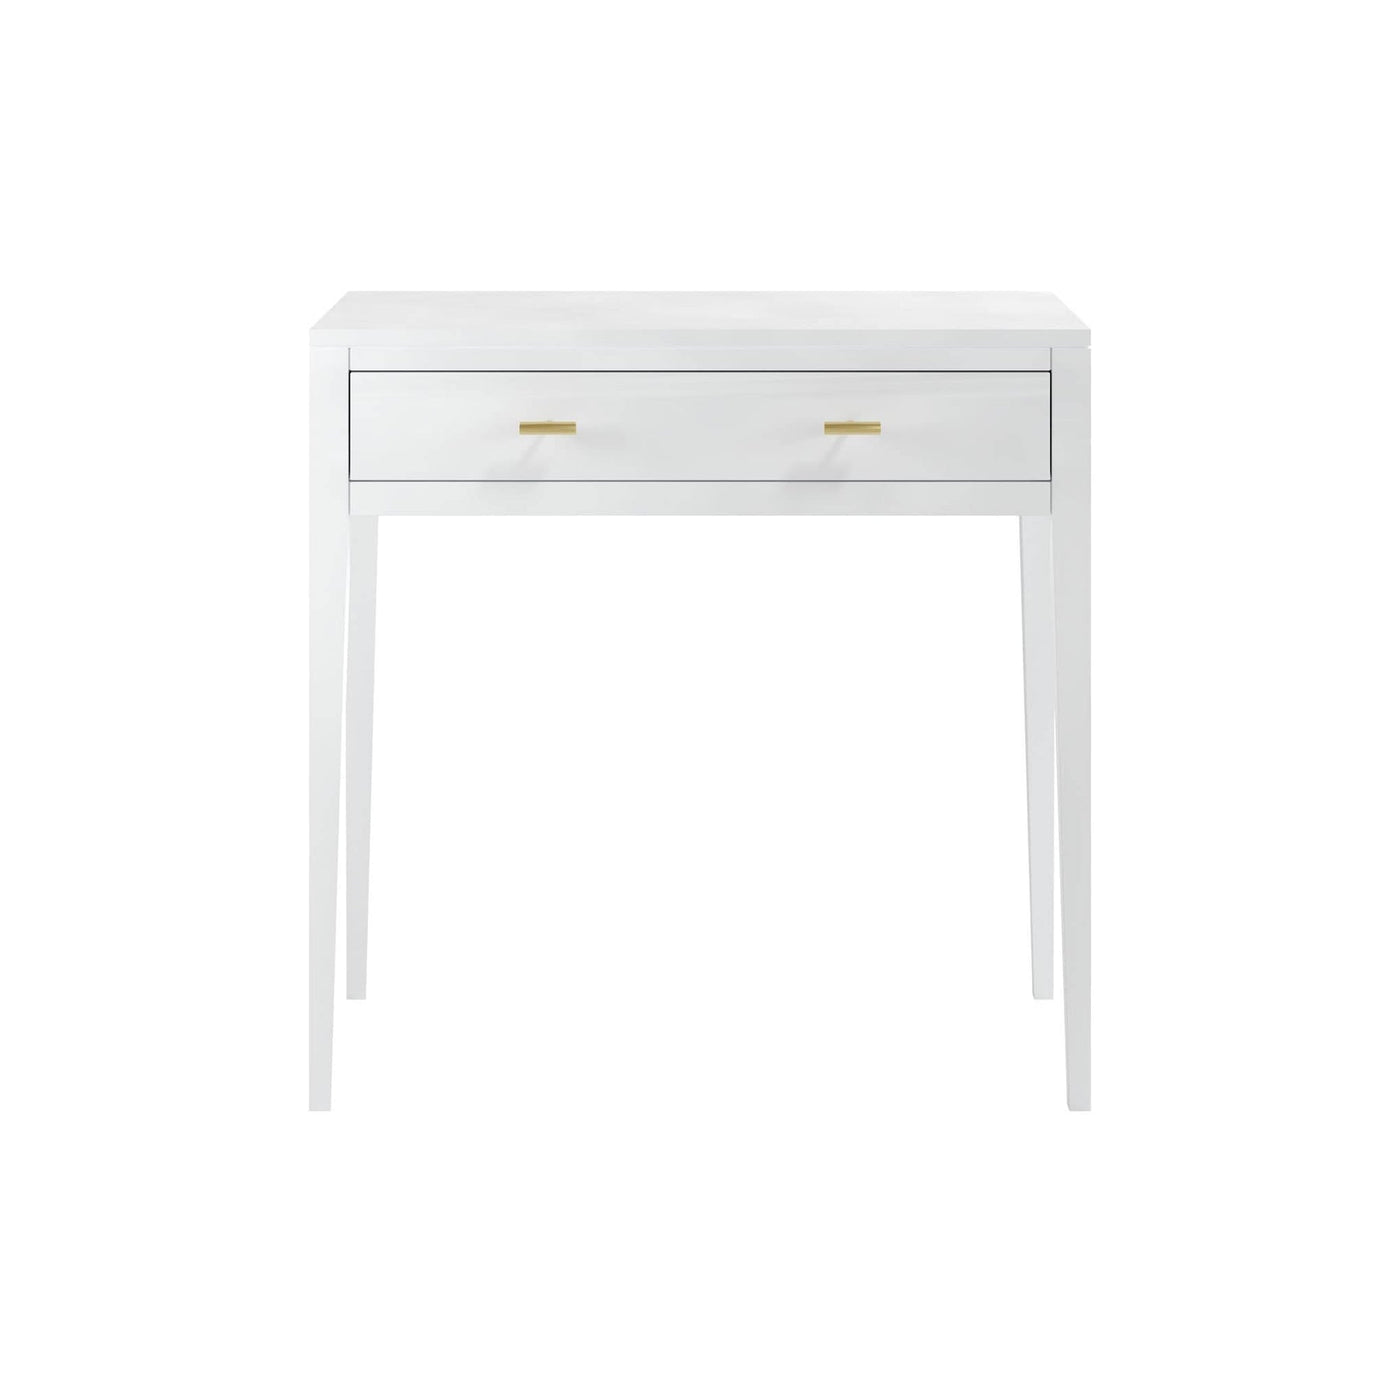 Hanley Console Table - White by D.I. Designs-Esme Furnishings